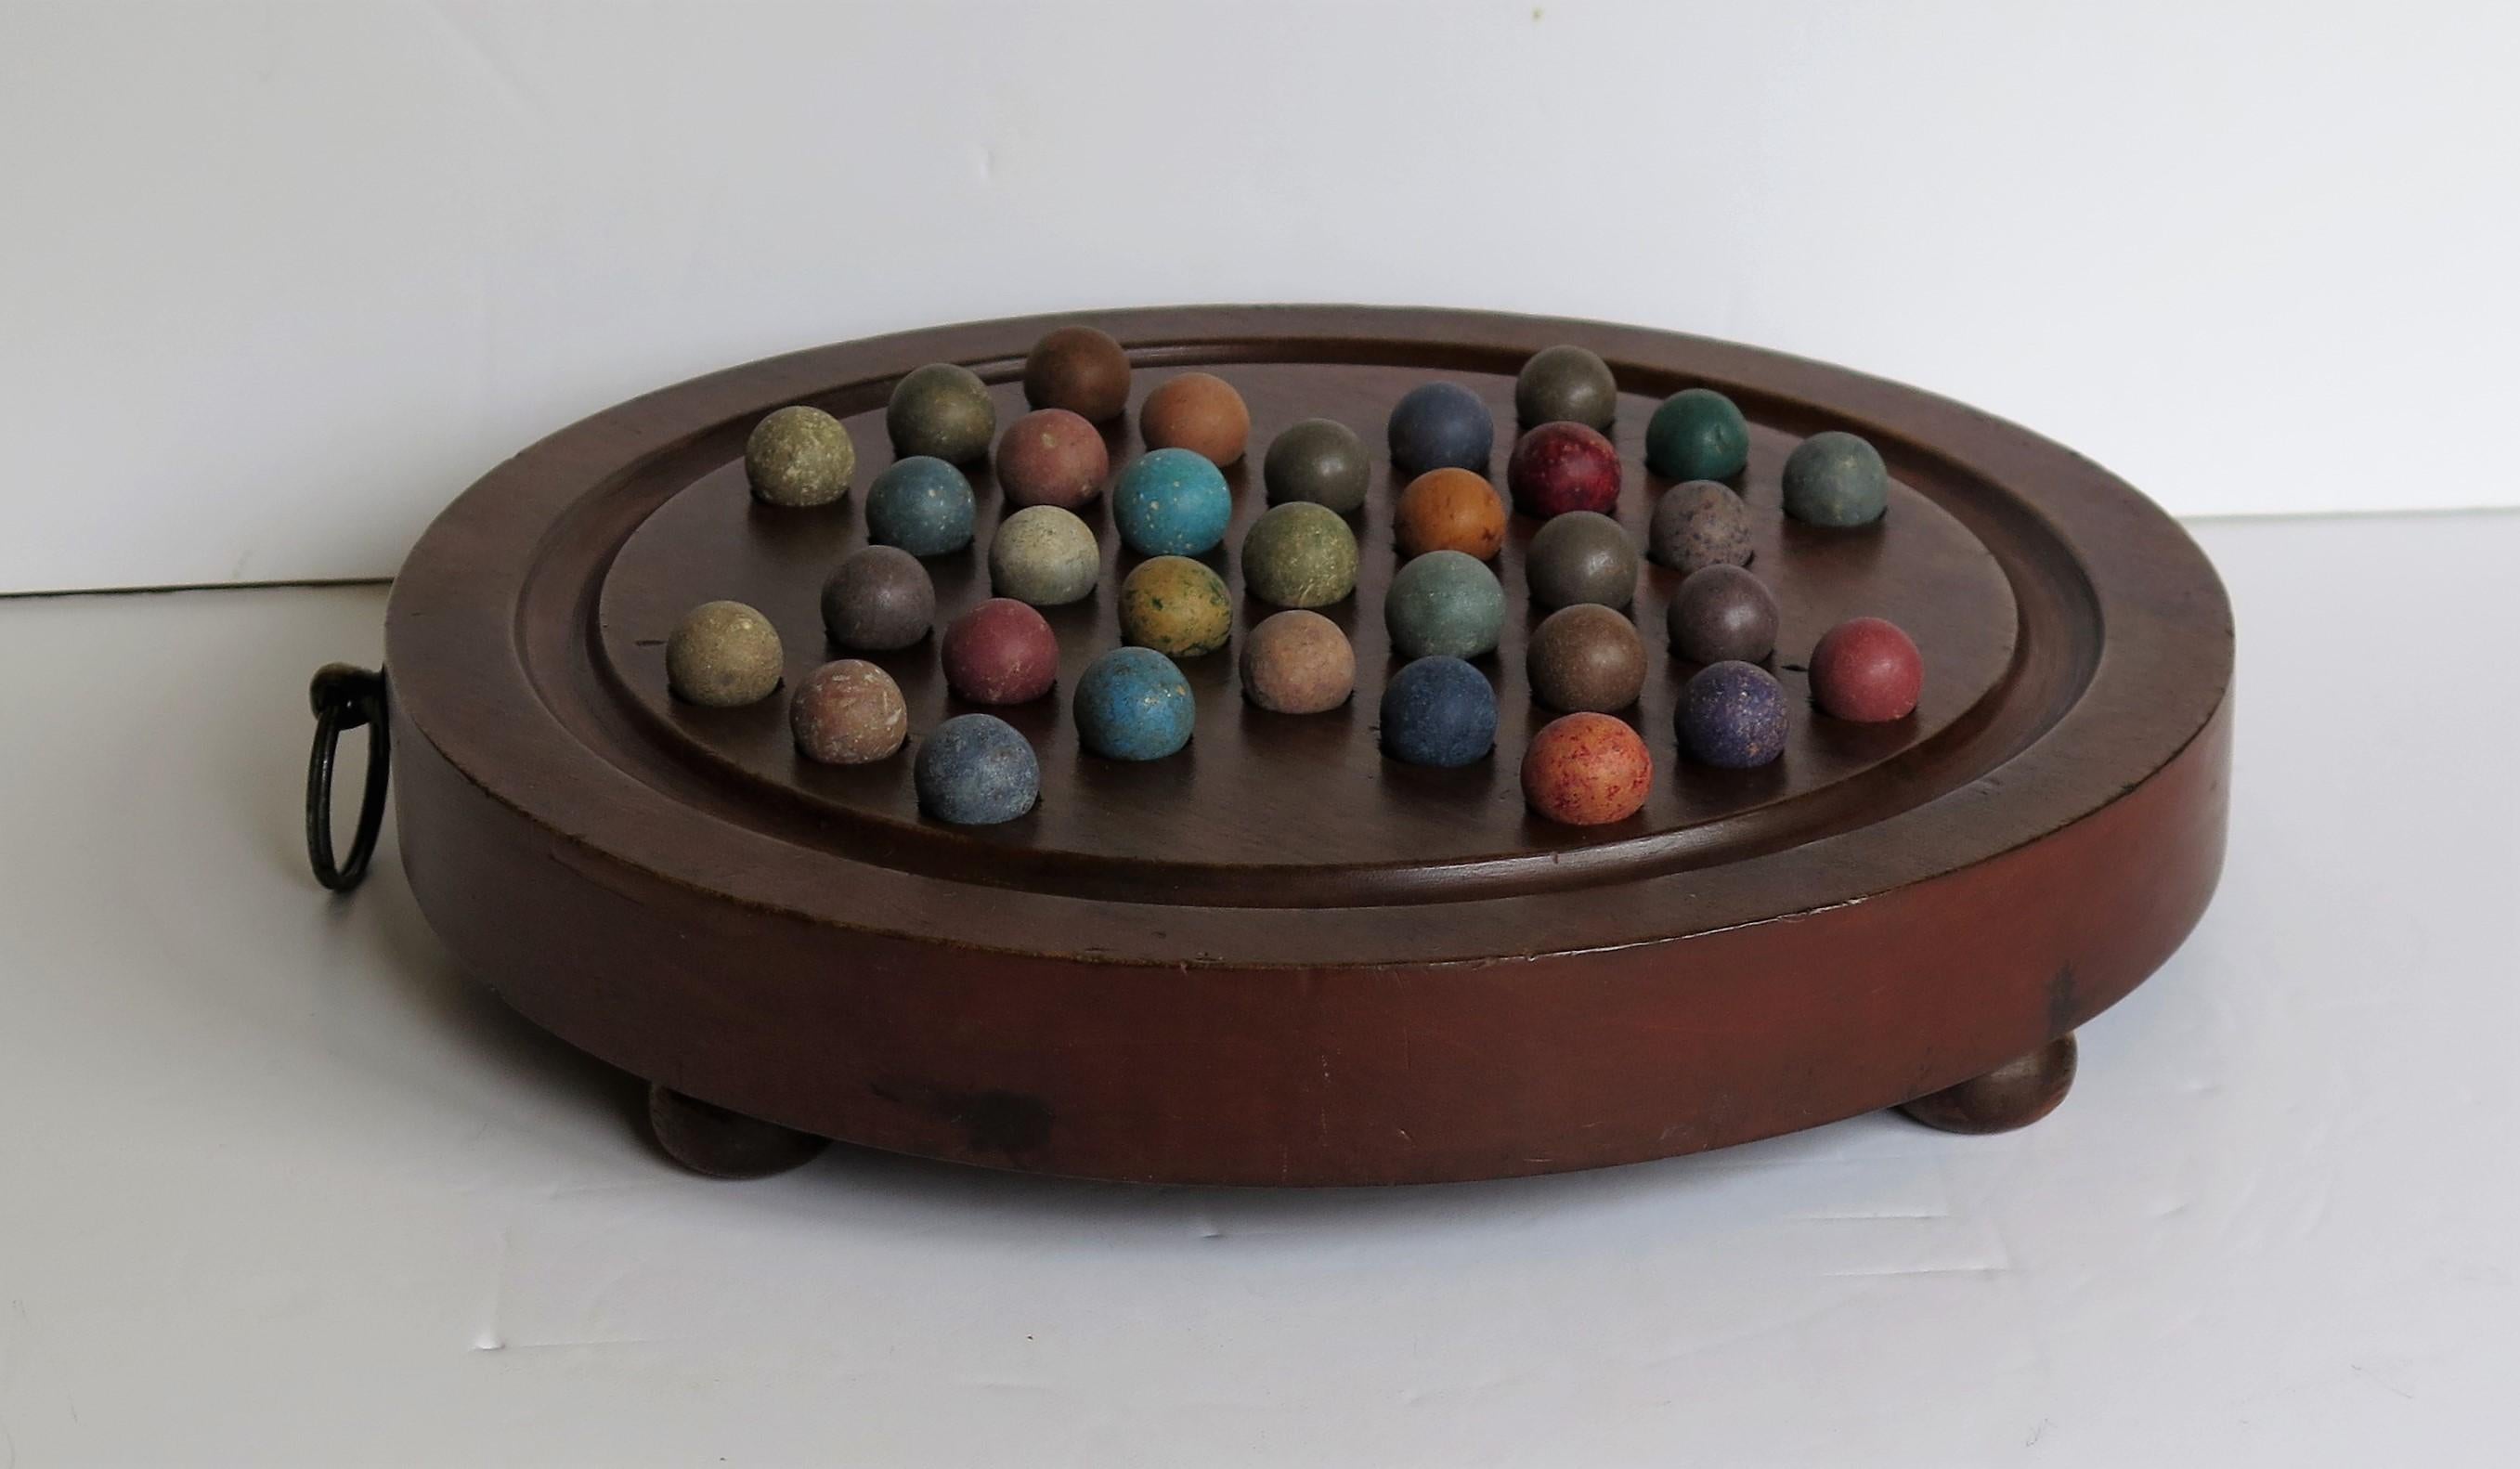 Stone Marble Solitaire Hardwood Board with Hanging Ring 33 Clay Marbles, circa 1860